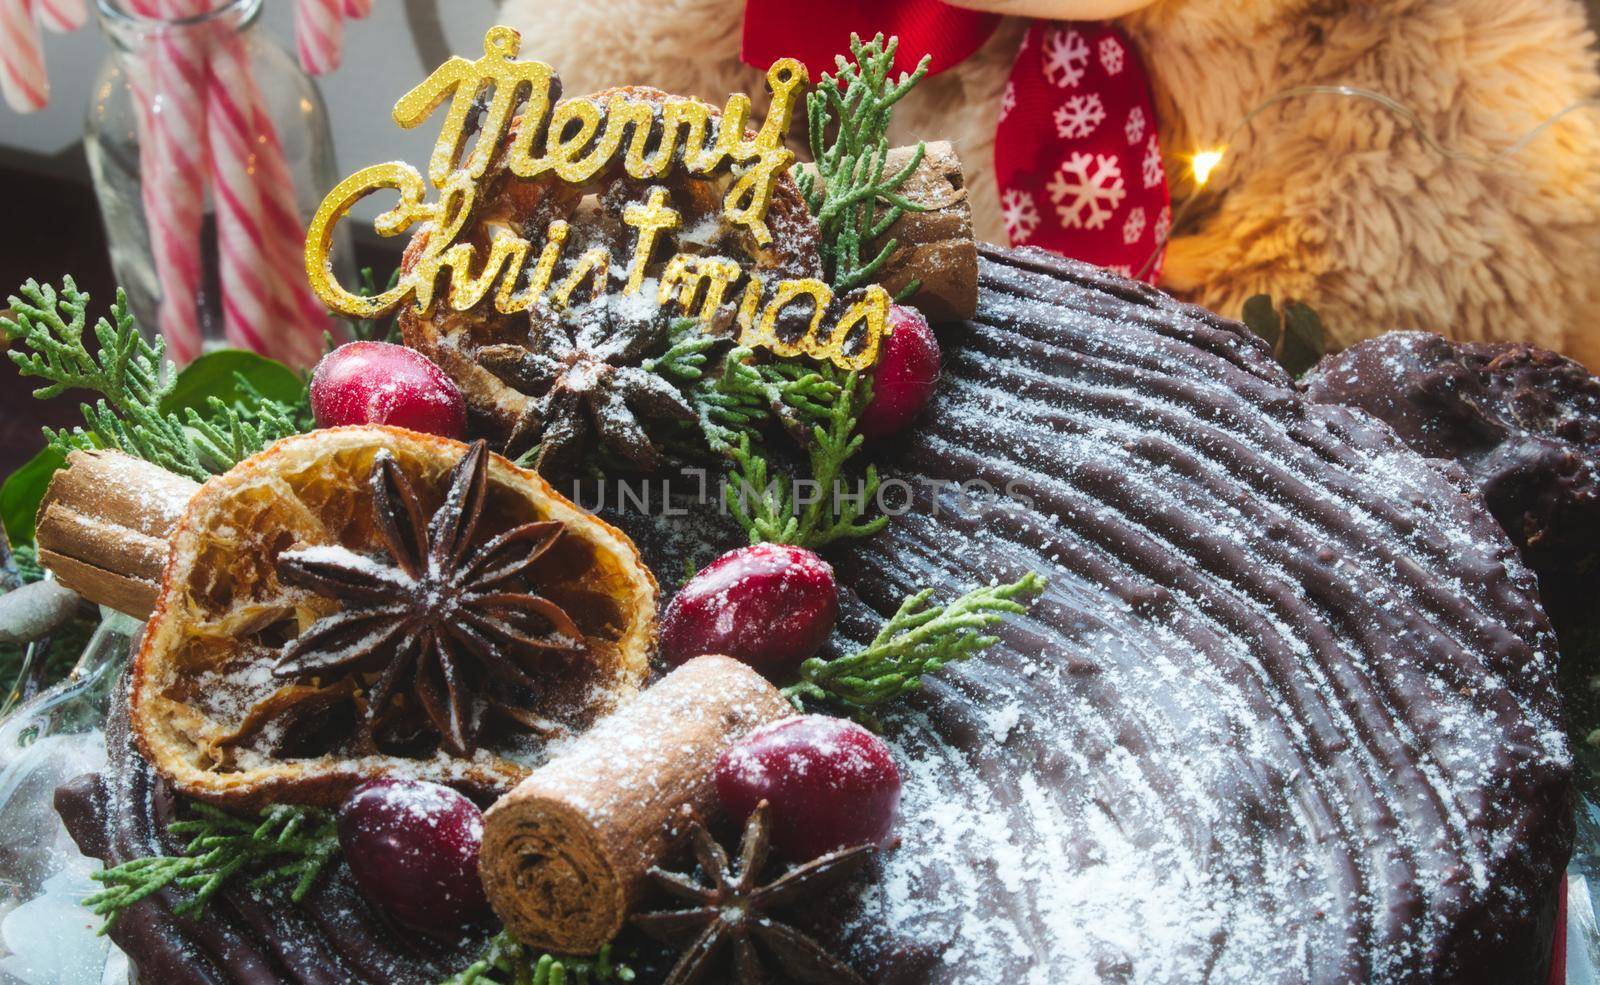 Merry Christmas gold lettering on a chocolate gateau cake by tennesseewitney